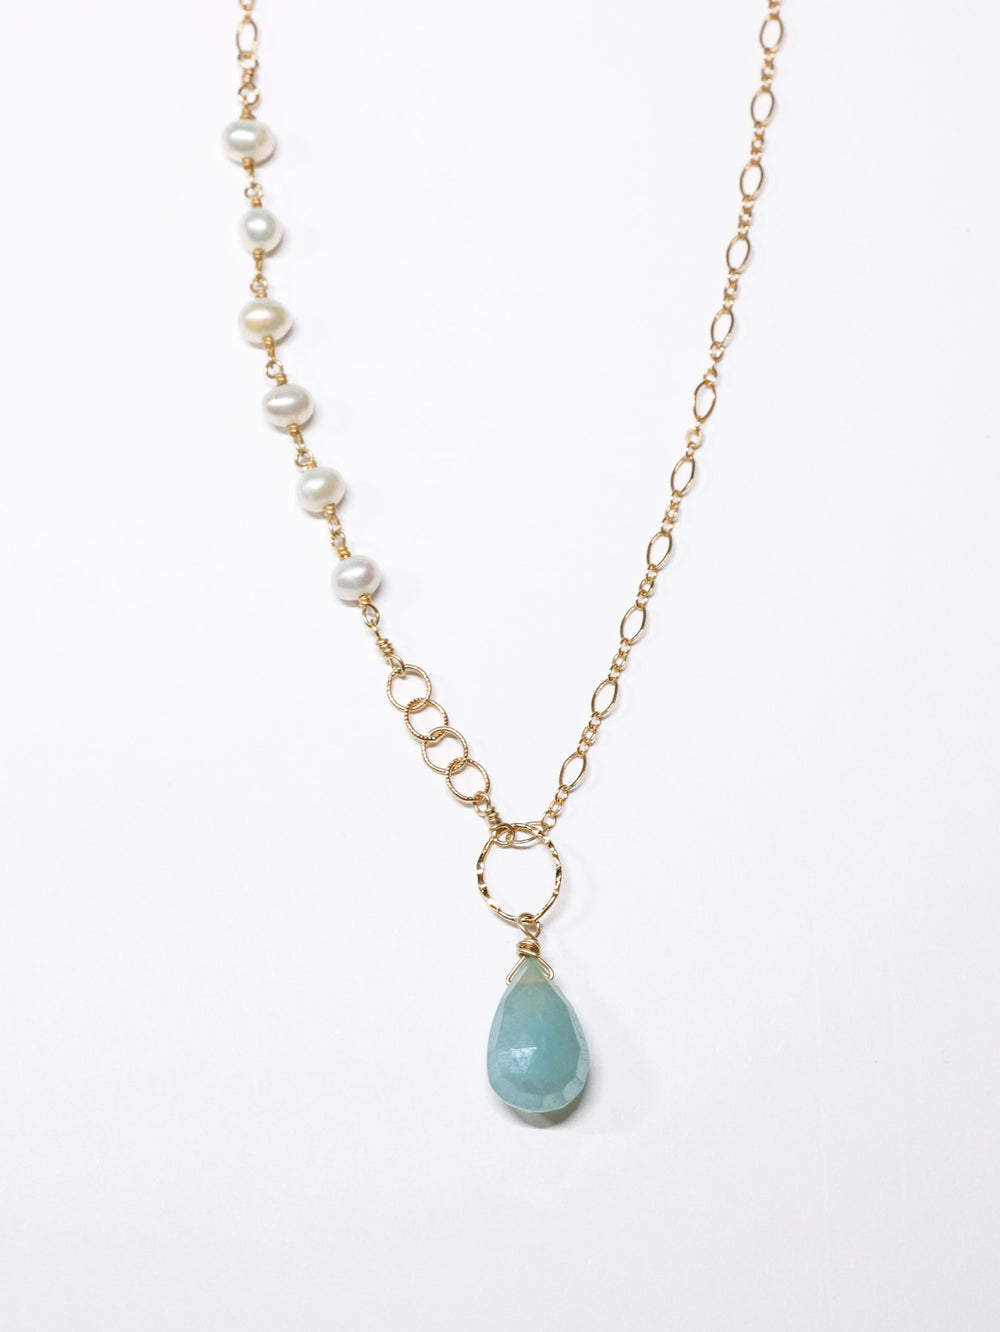 Cecilia nh necklace in gold